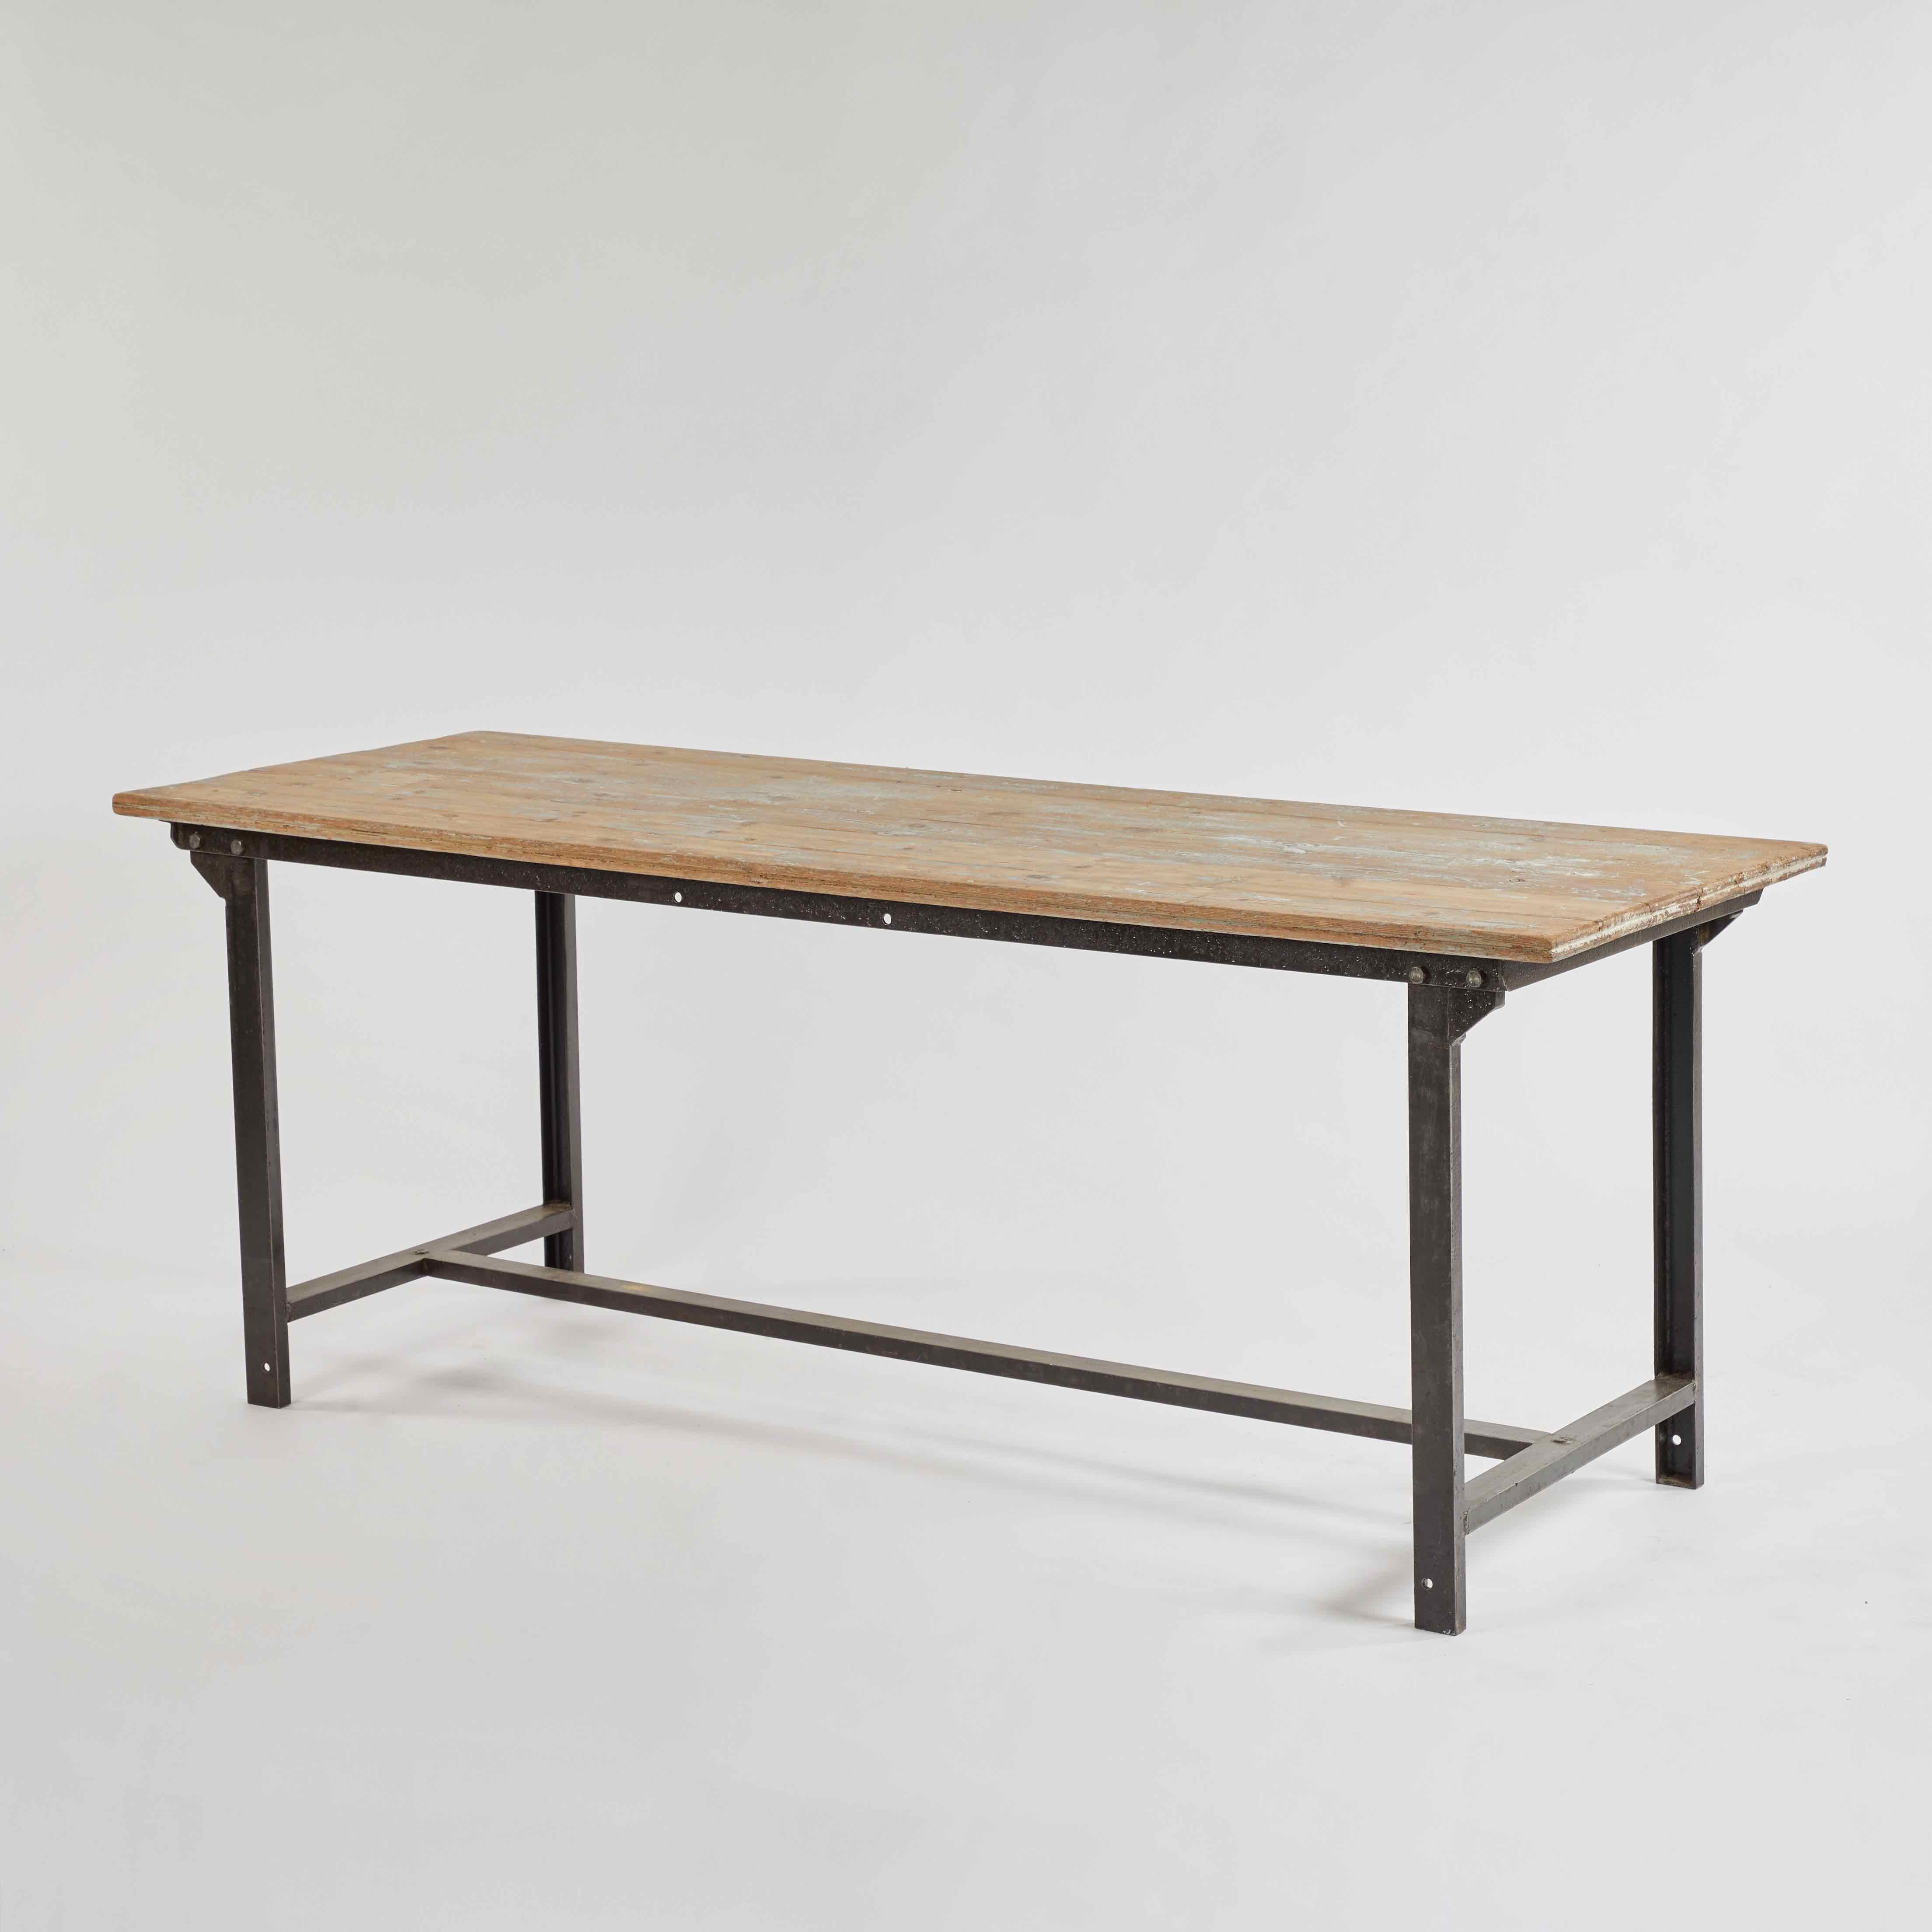 Early 20th Century French Industrial Metal and Wood Table 1